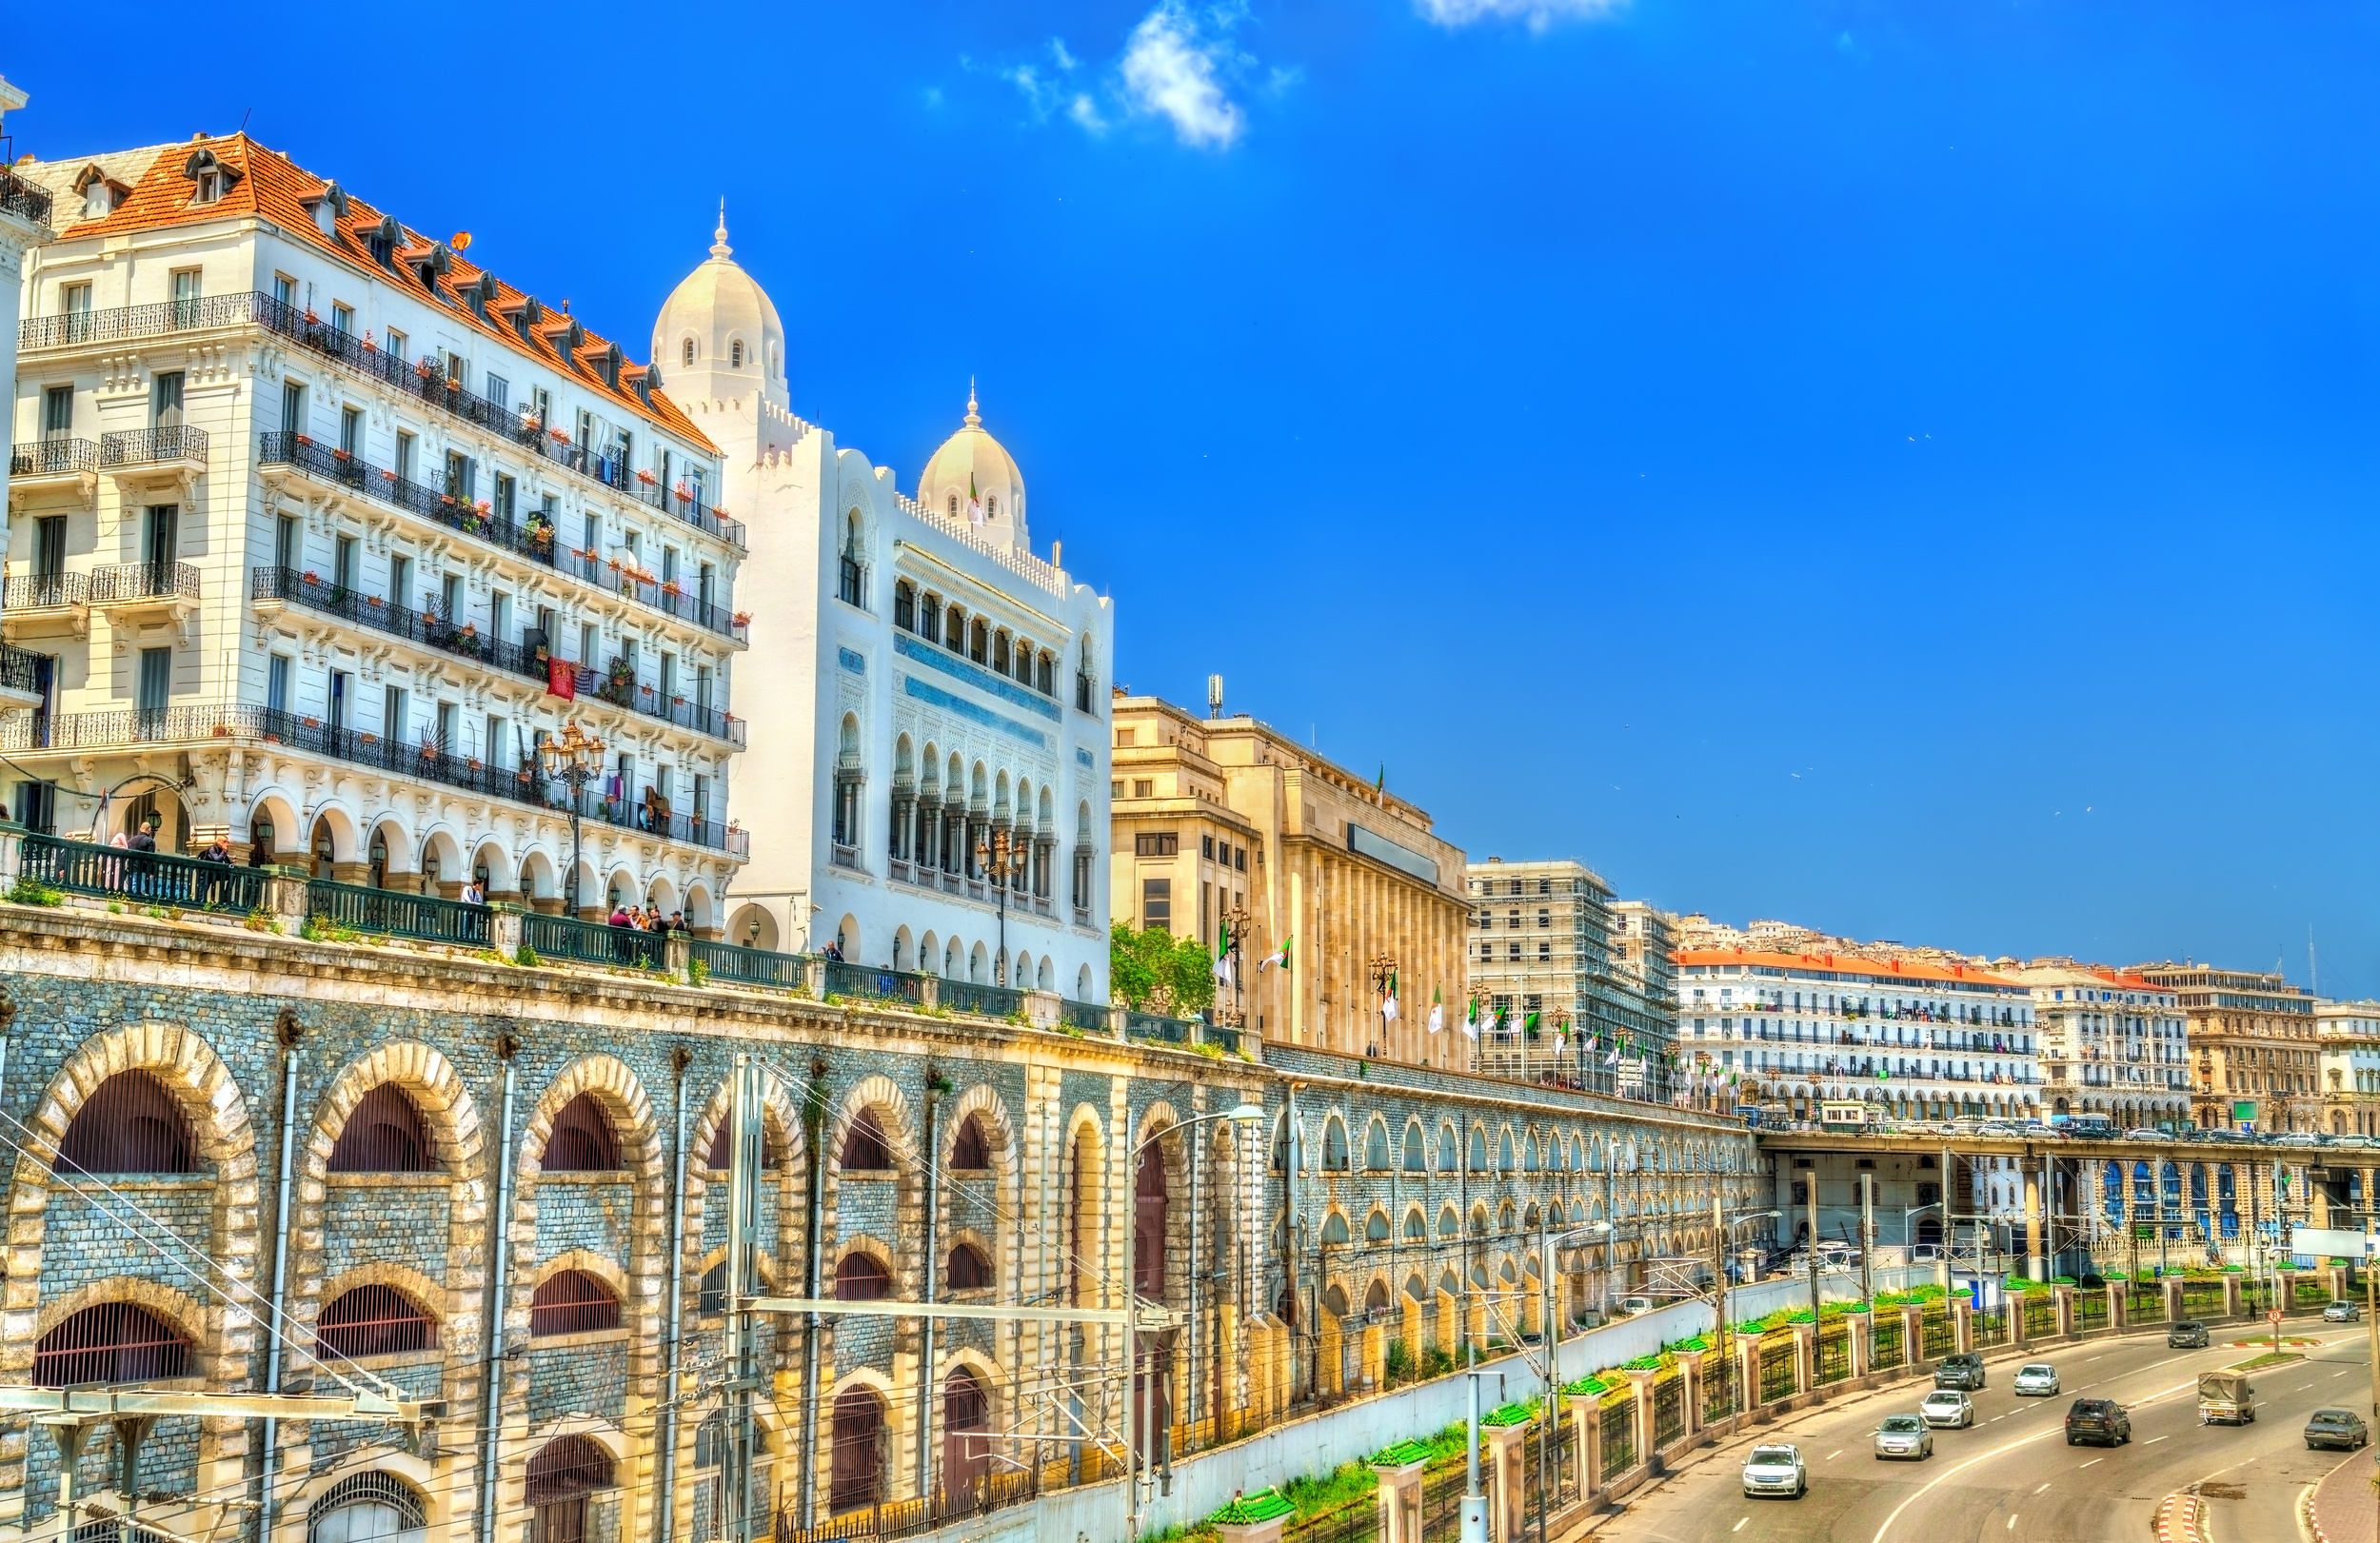 <p>Algeria’s official languages are Arabic and Berber, but French is also commonly understood. While not as widely used as in neighboring Morocco, it will be your best bet if you don’t speak one of the official languages. </p><p>You may also like: <a href='https://www.yardbarker.com/lifestyle/articles/20_ingredients_that_will_make_your_grilled_cheese_even_better_010724/s1__26129069'>20 ingredients that will make your grilled cheese even better</a></p>